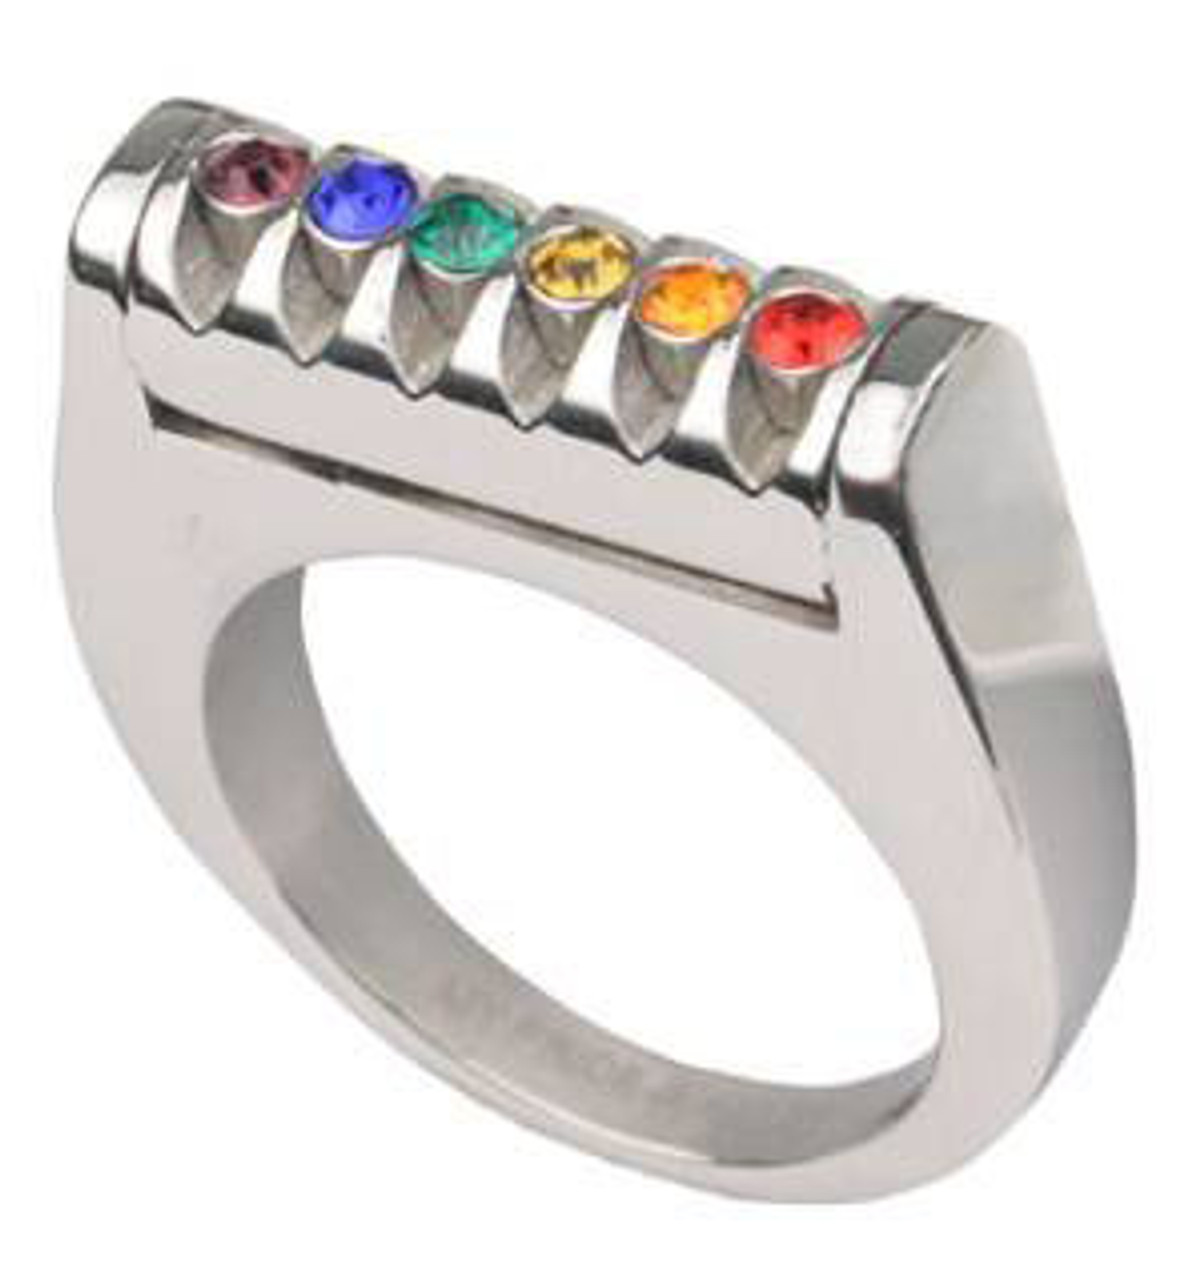 A Rainbow Grooved Top CZ Ring - LGBT Gay and Lesbian Pride Ring  
lesbian pride ring, gay rings, rainbow ring, gay pride ring, pride ring, pride rings, LGBTQ rings, LGBT ring, pride jewelry,  pride jewellery, gay jewellery, gay flag rings, pride ring, gay jewelry, gay men rings,
